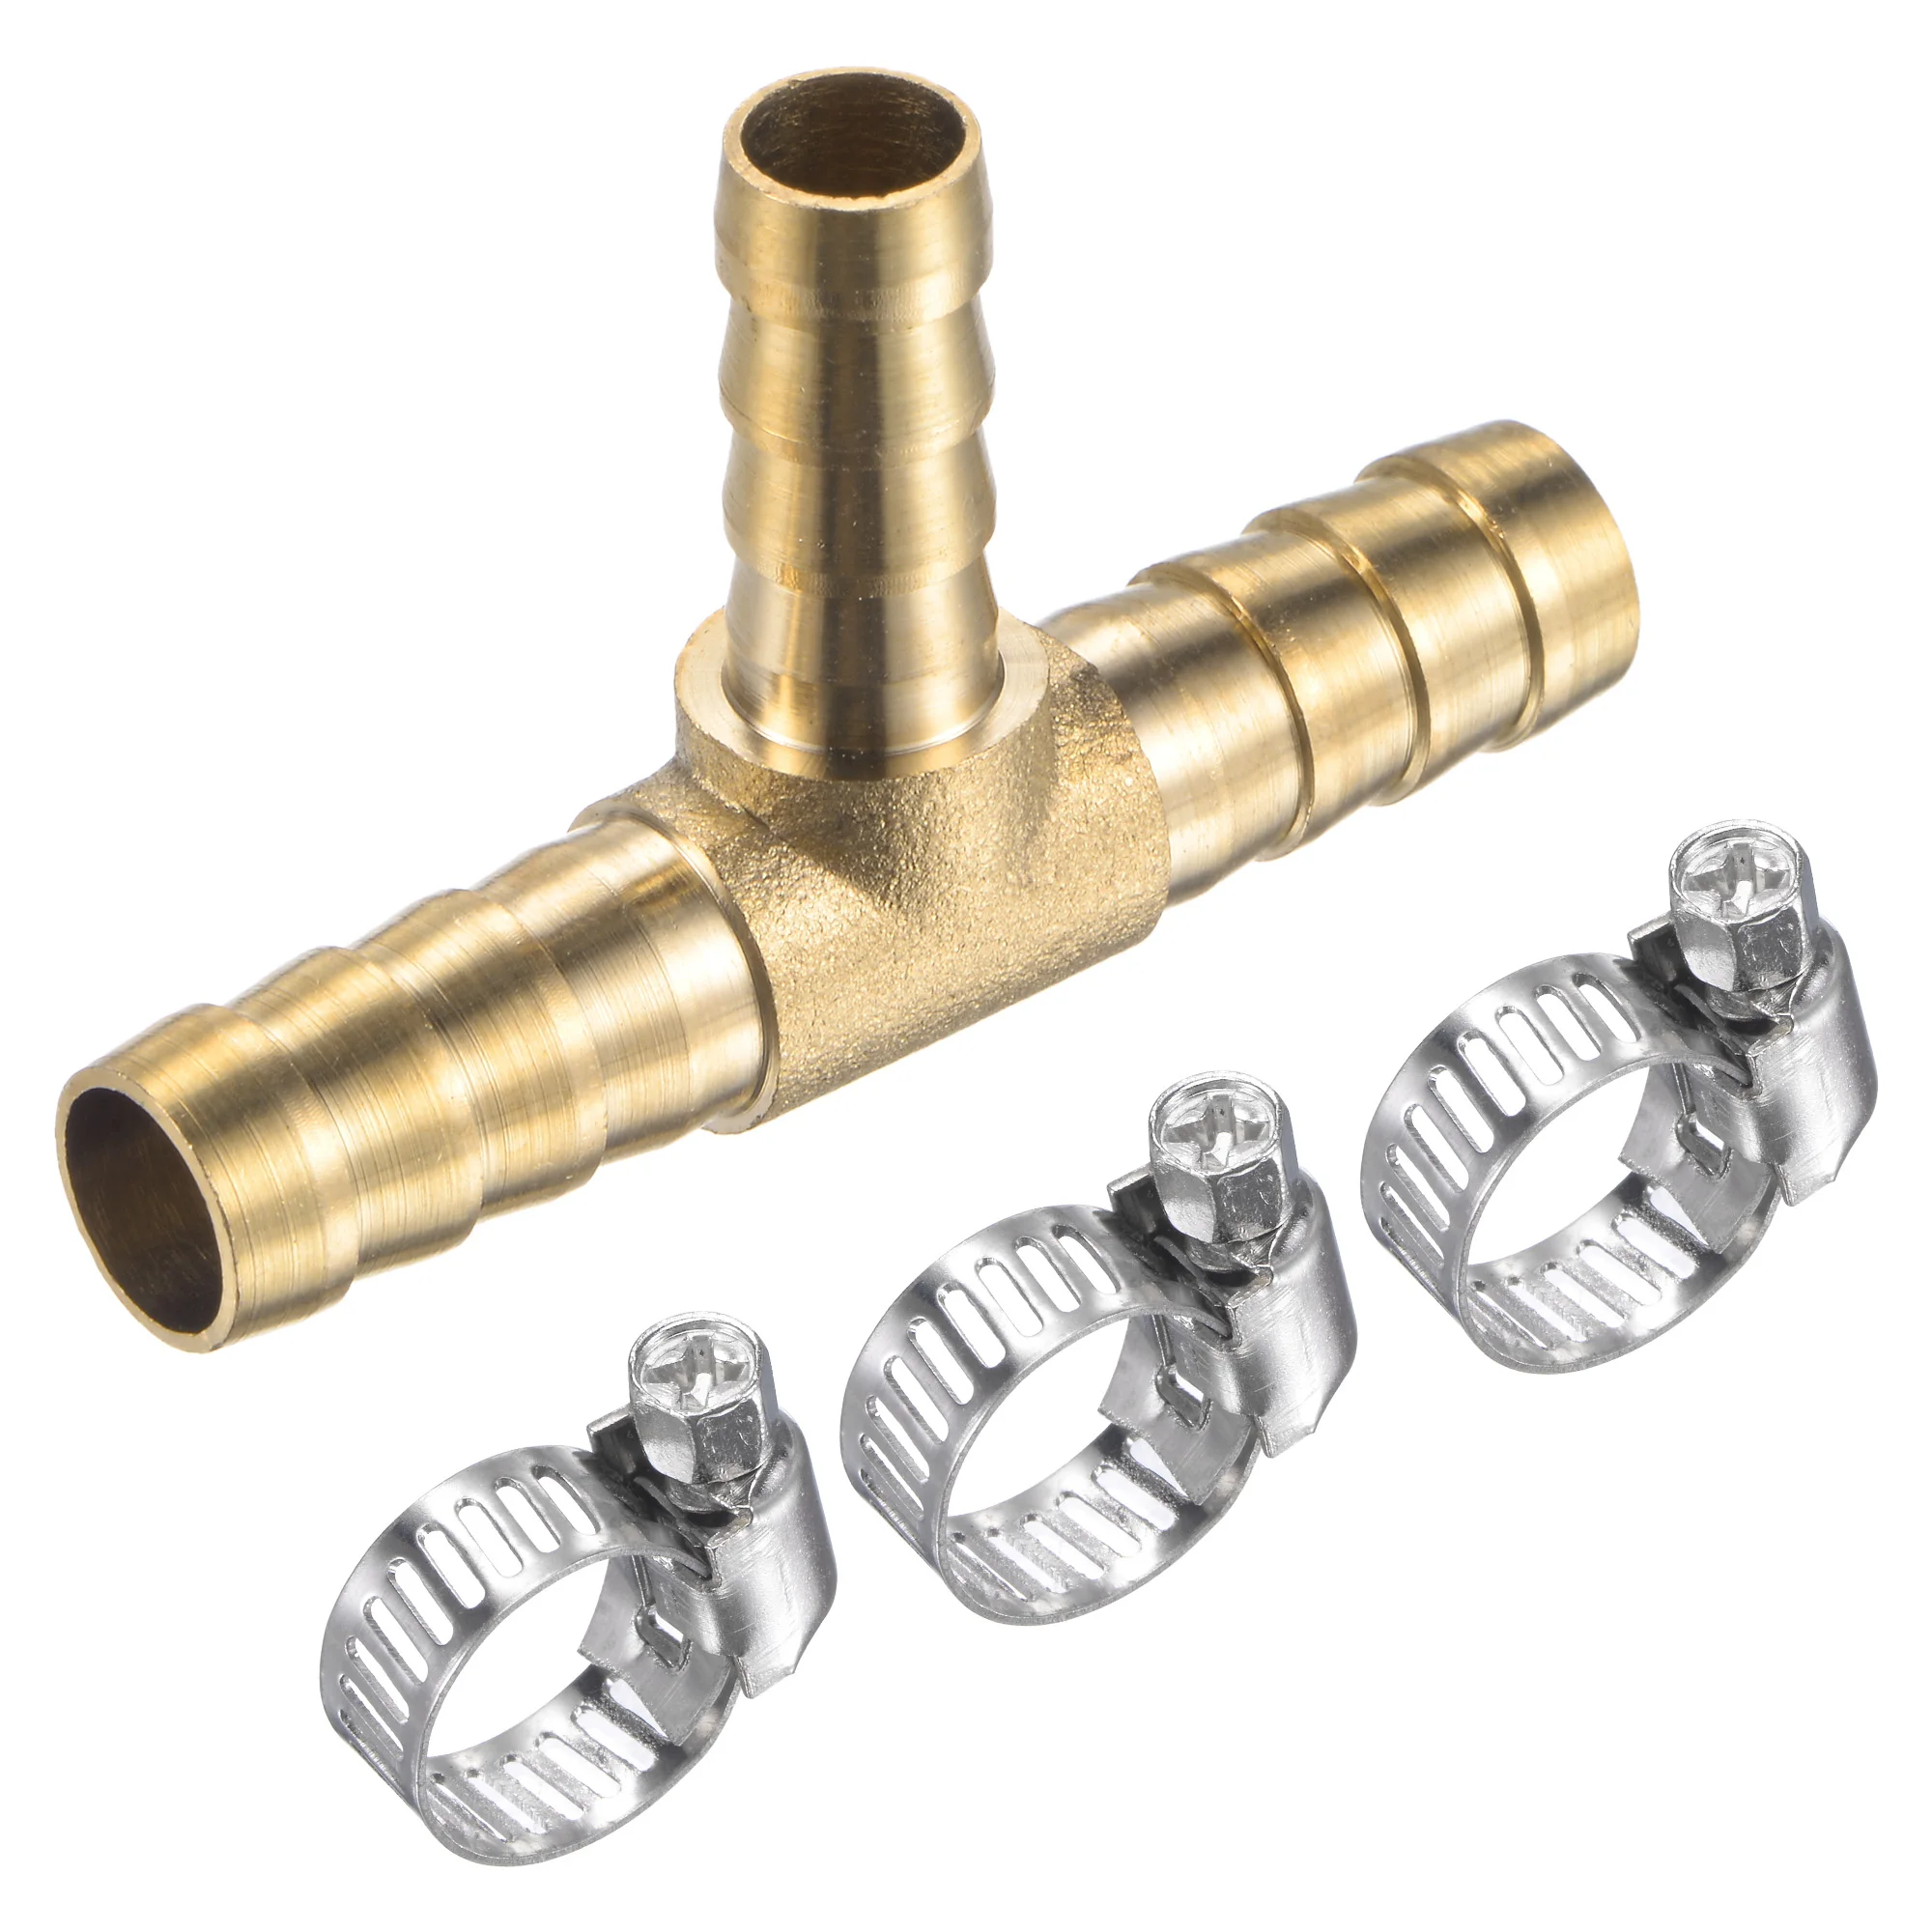 

Uxcell Brass Hose Barb Fitting 5/16" x 5/16" x 1/4" OD Tee Pipe Connector with Stainless Steel Hose Clamps 1 Set